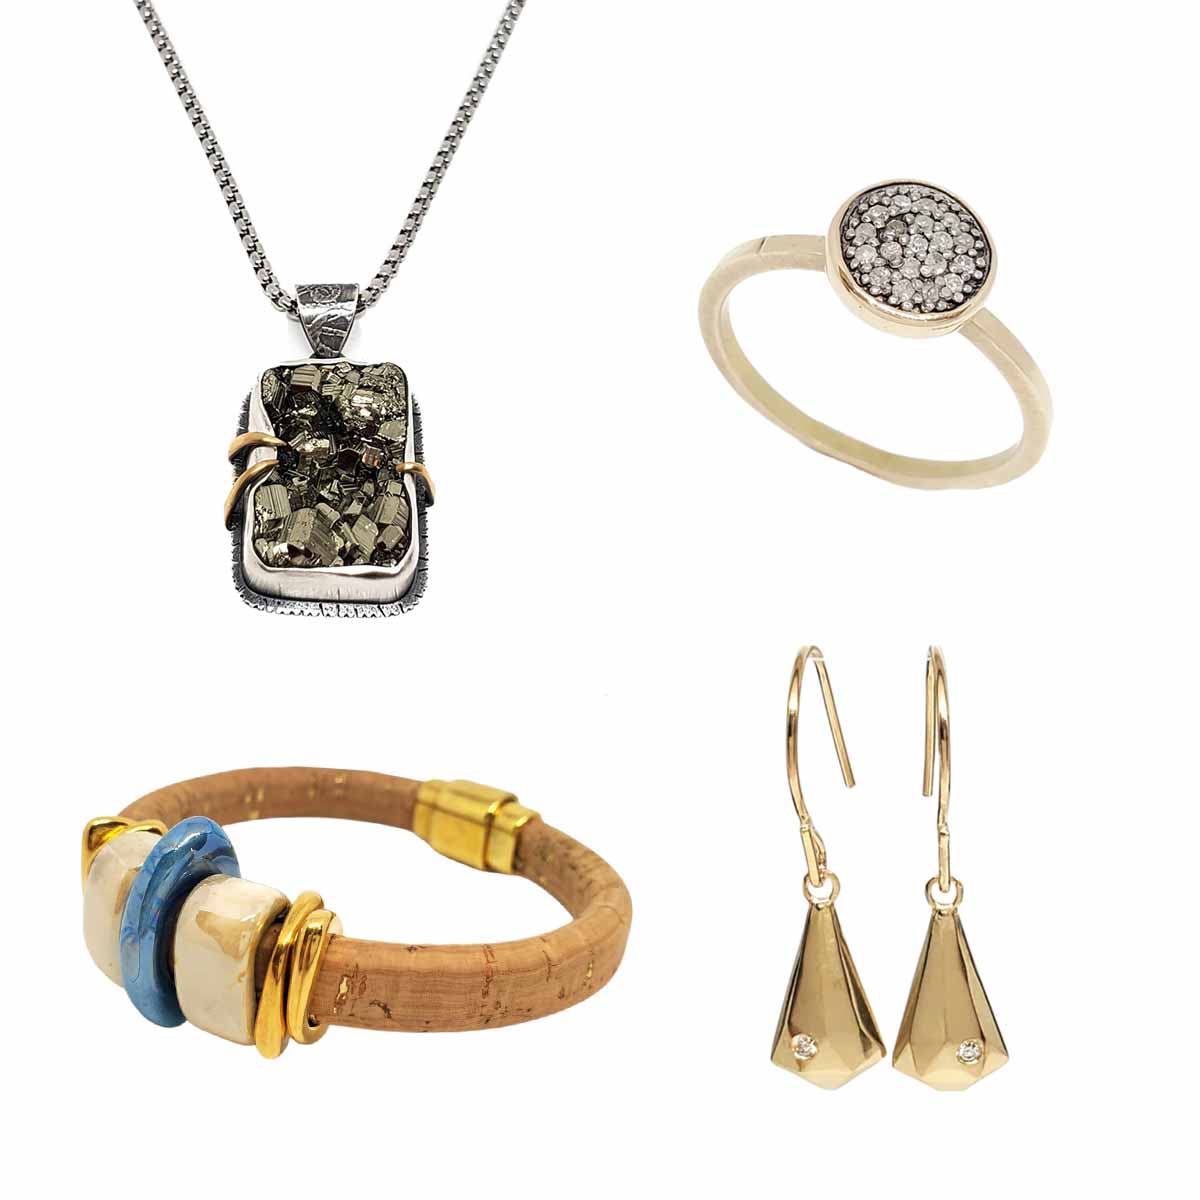 Shop Jewelry by Category